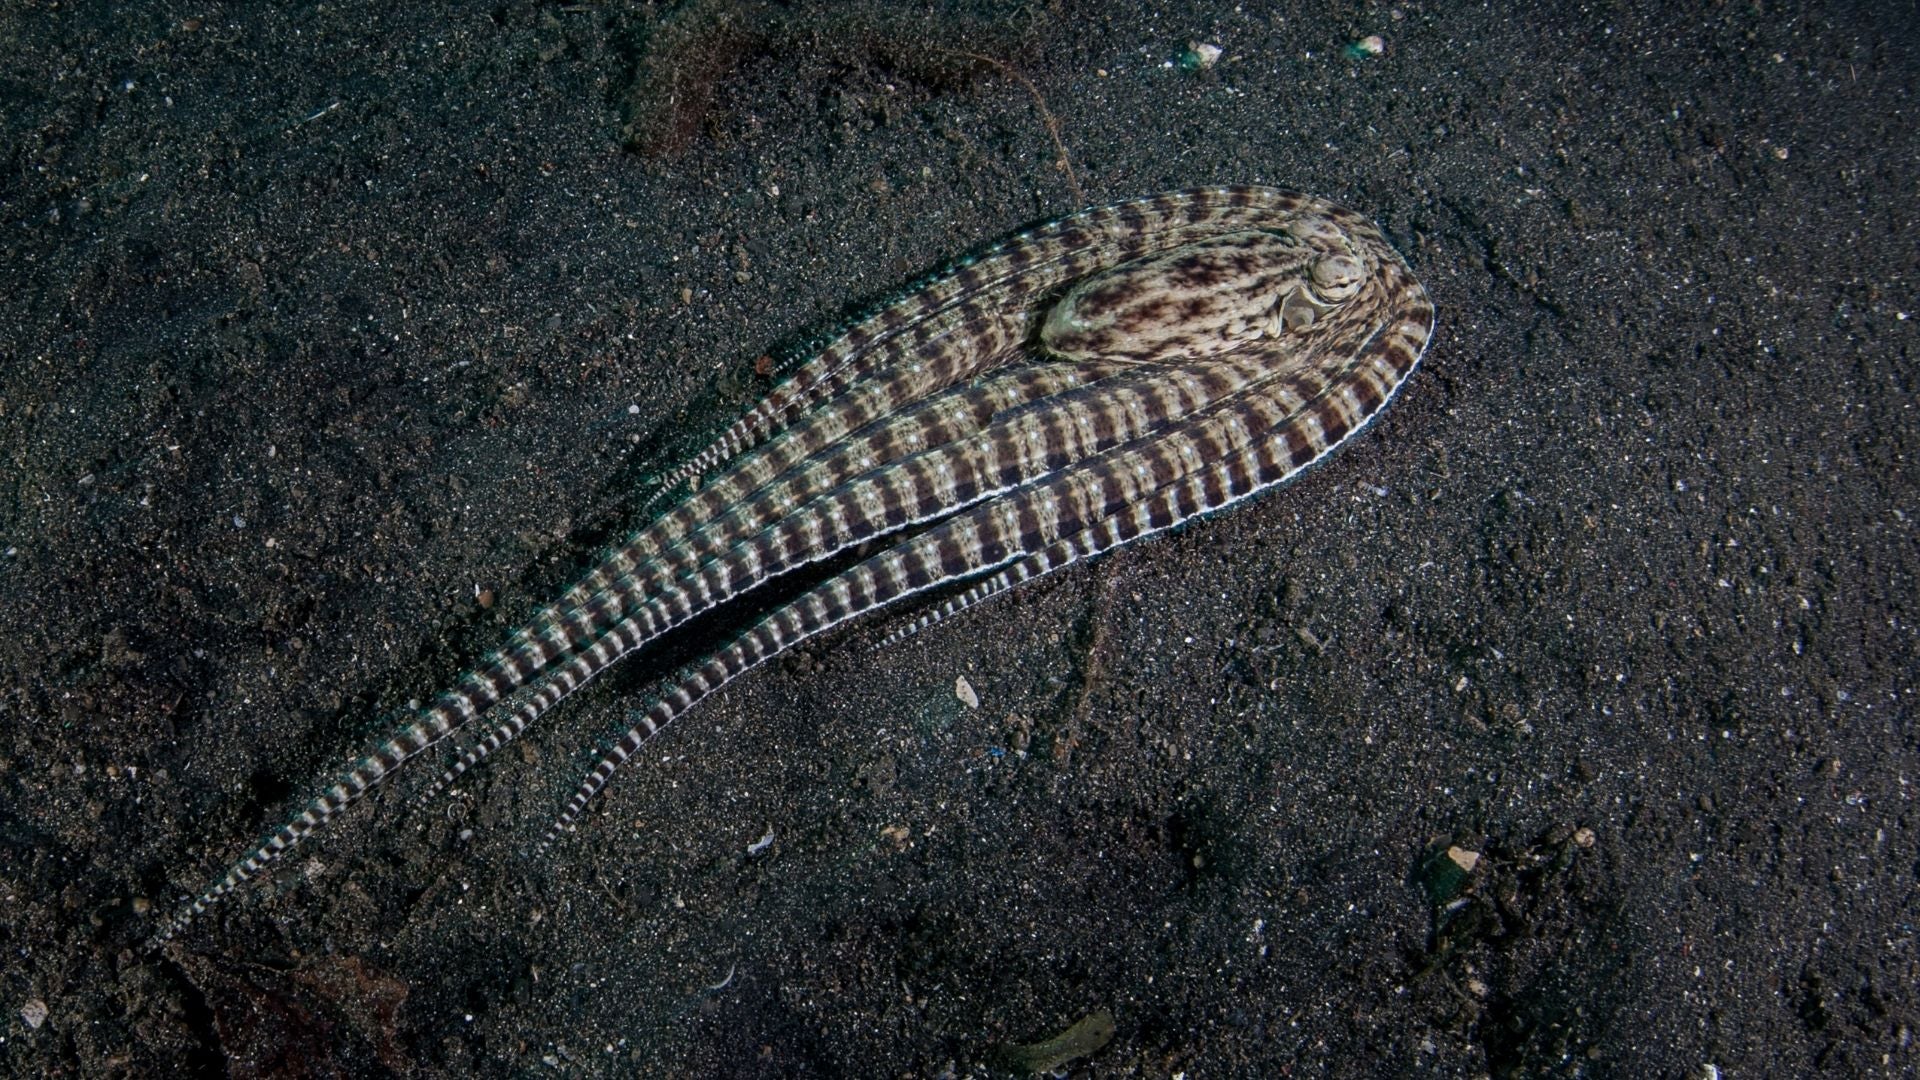 A camouflaging cephalopod (the mimic octopus)